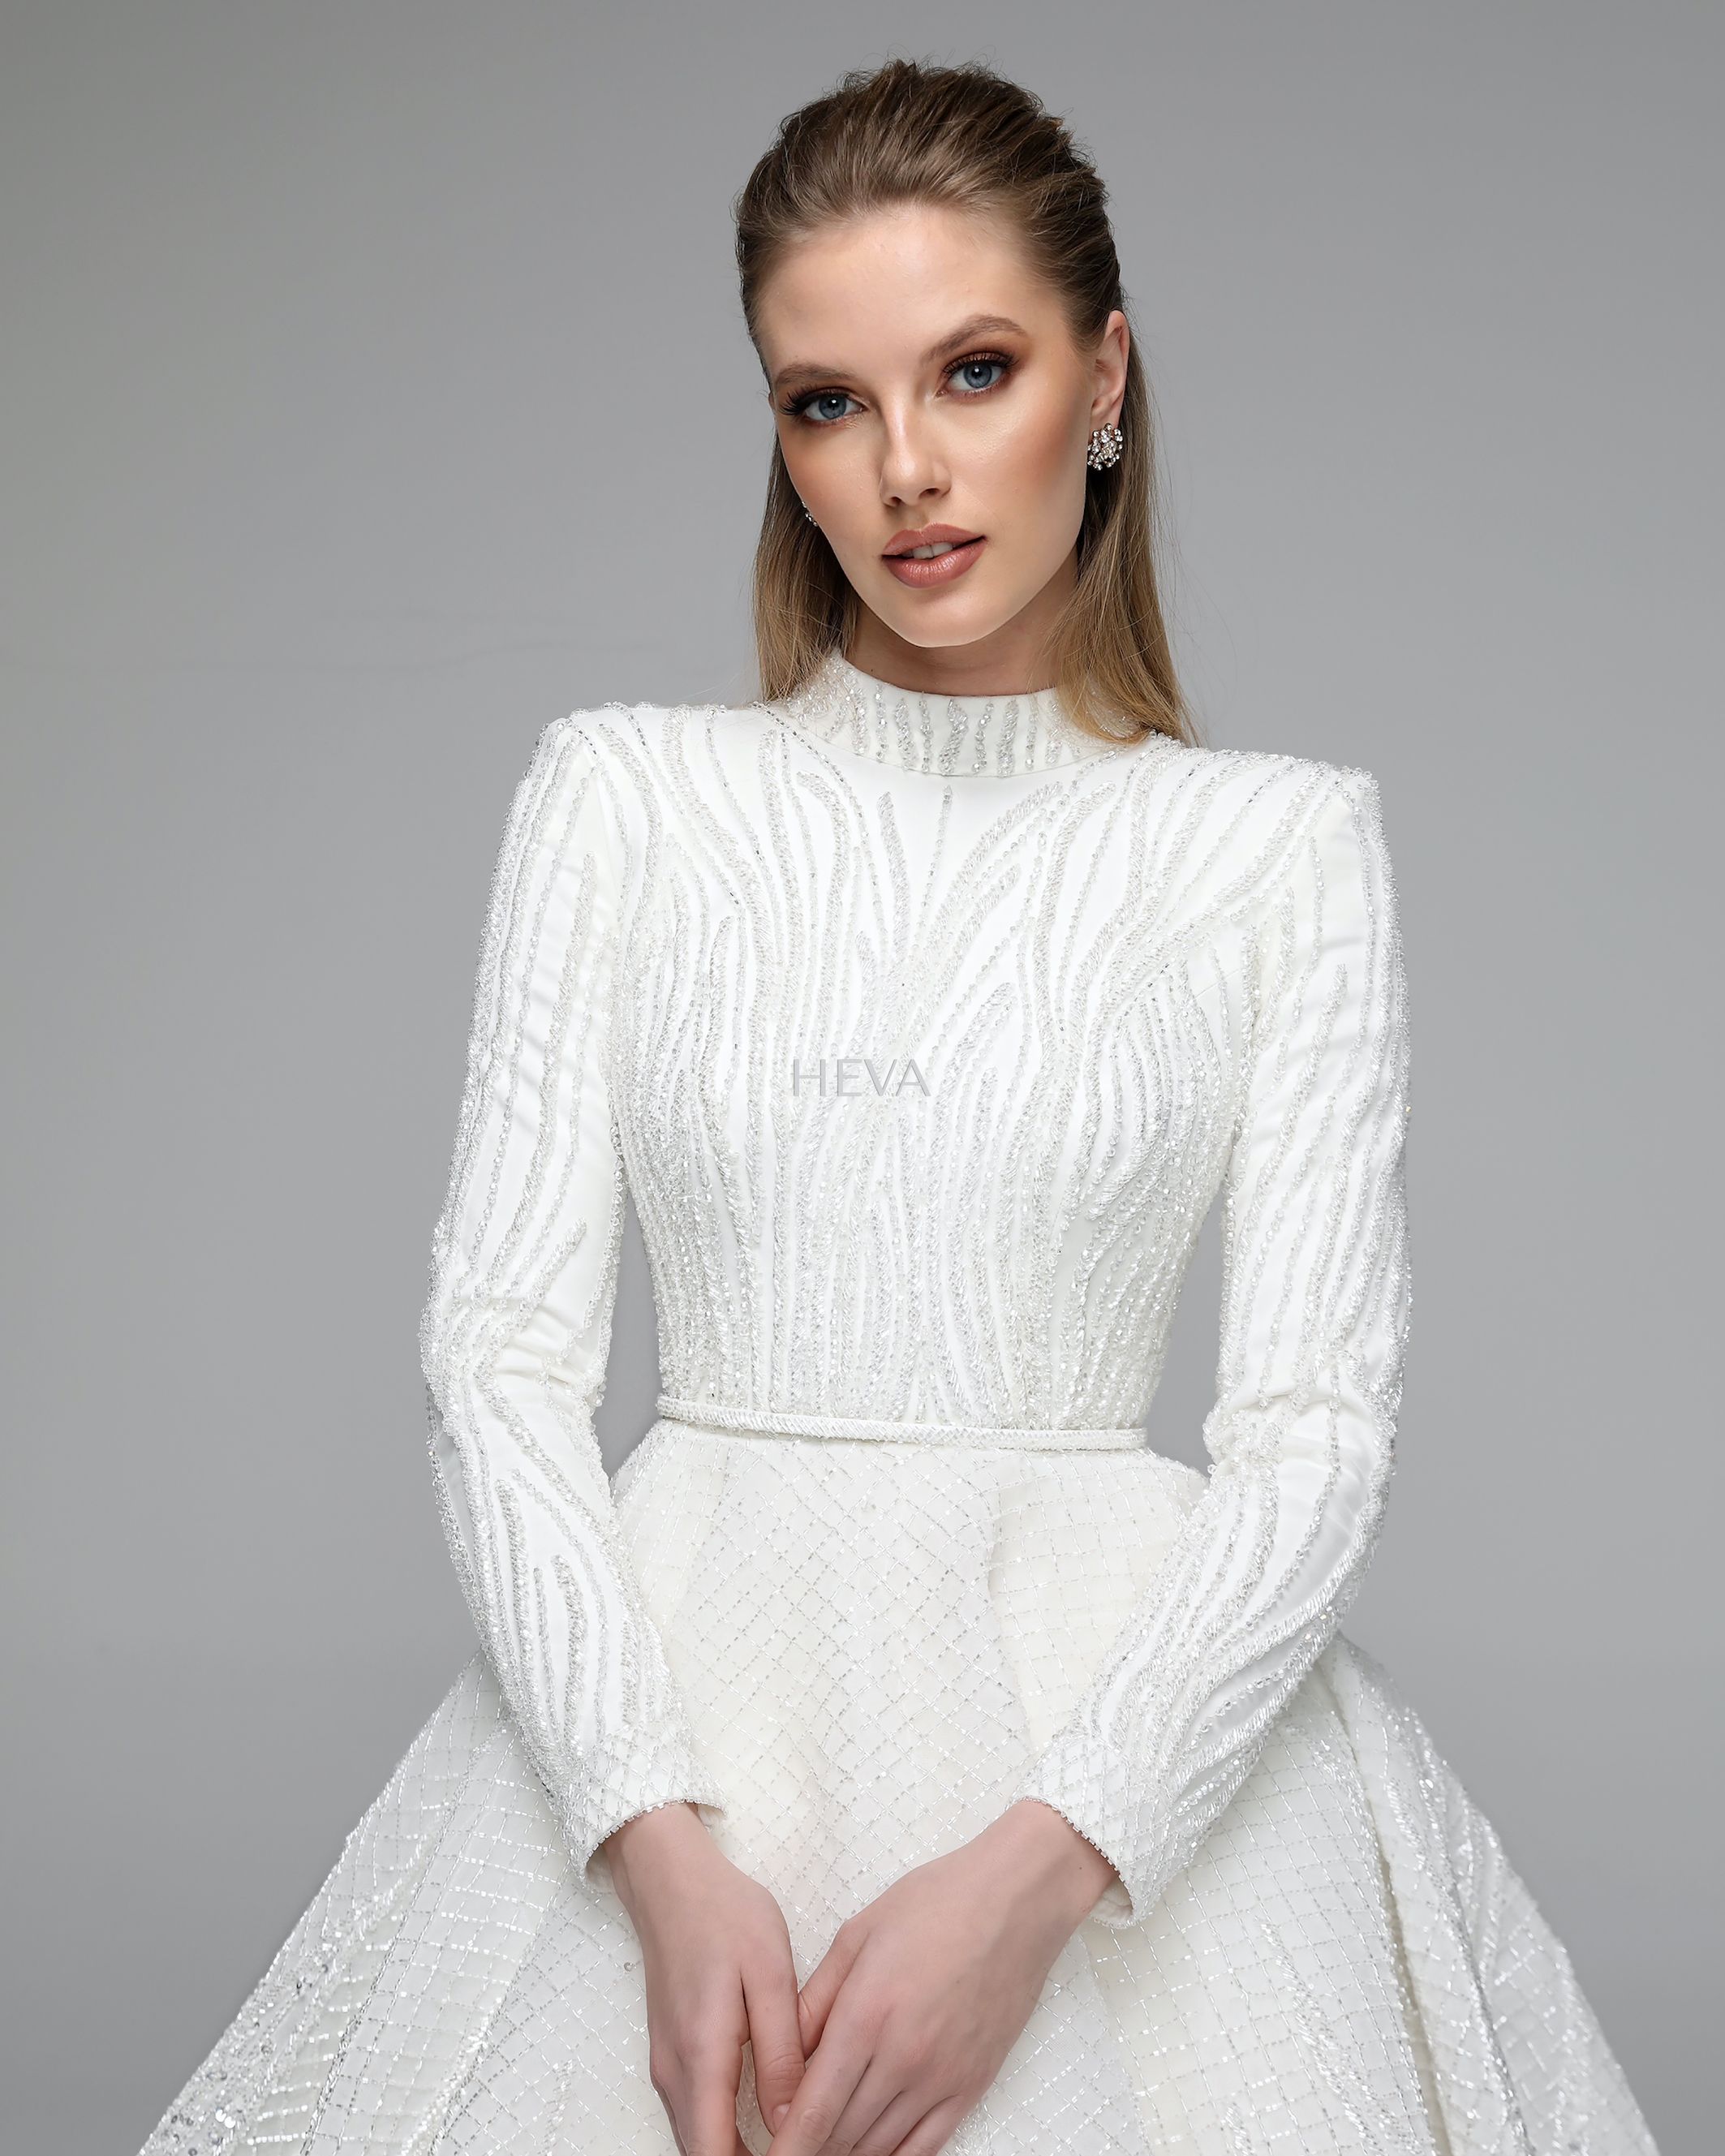 HV22014 - Special Design Patterning, Padded Shoulder Custom-Designed Wedding Gown with Long Sleeves, Neck, Corset-Body, Frilled Skirt, and Train